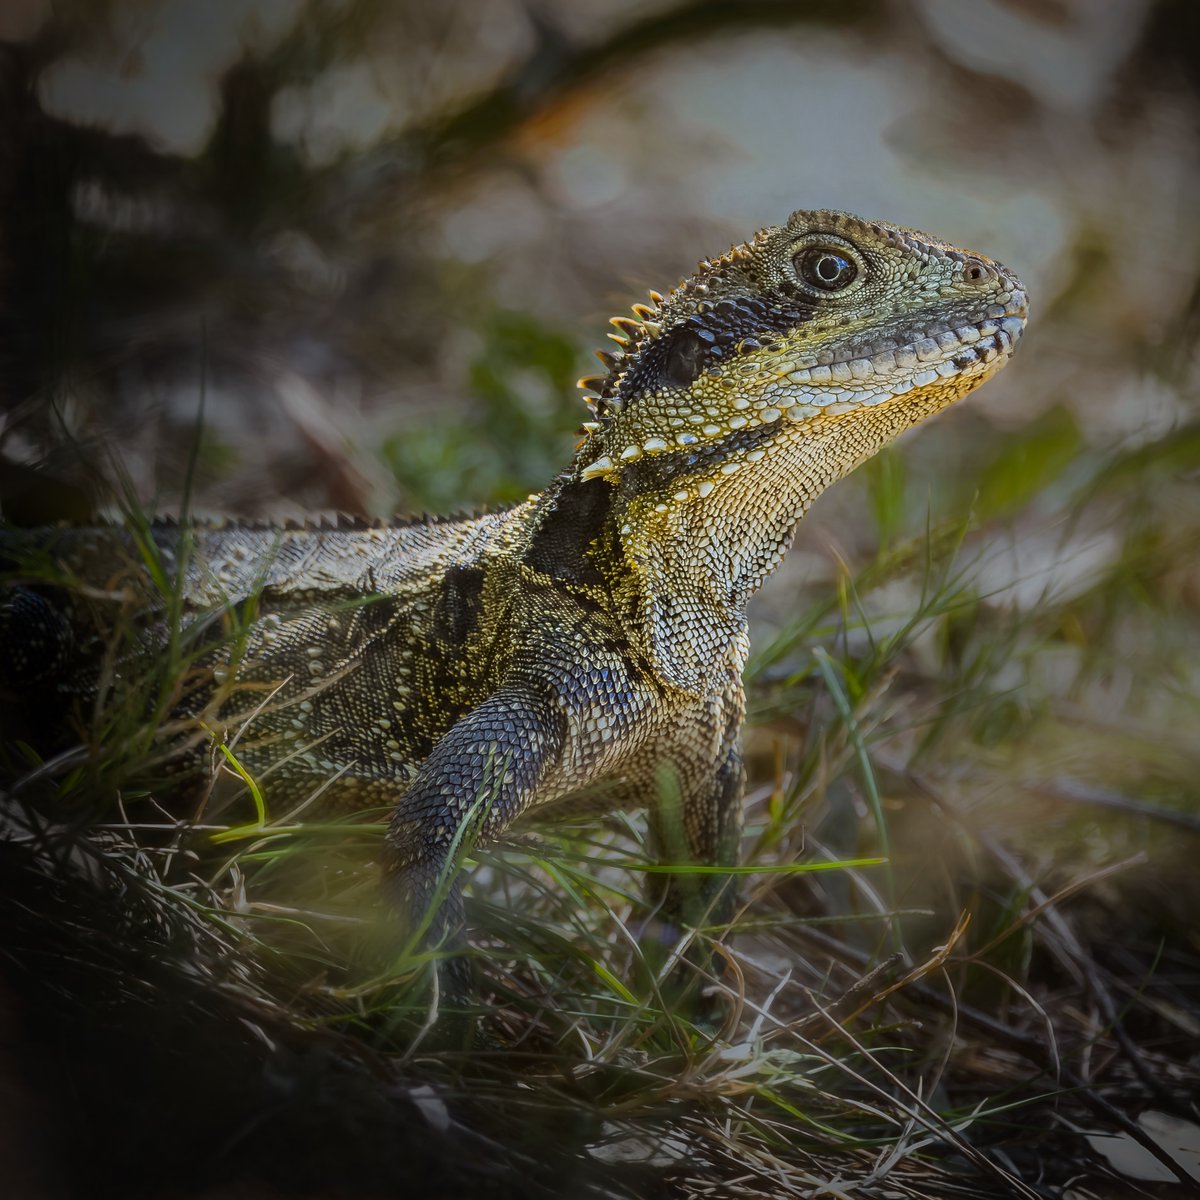 Happy World Wildlife Day! 🦎🍃 The Garden provides important habitat for a diverse range of #reptiles such as lace monitors, blue-tongued lizards and eastern water dragons. Which reptile friend is your favourite? ⬇️ #WWD23